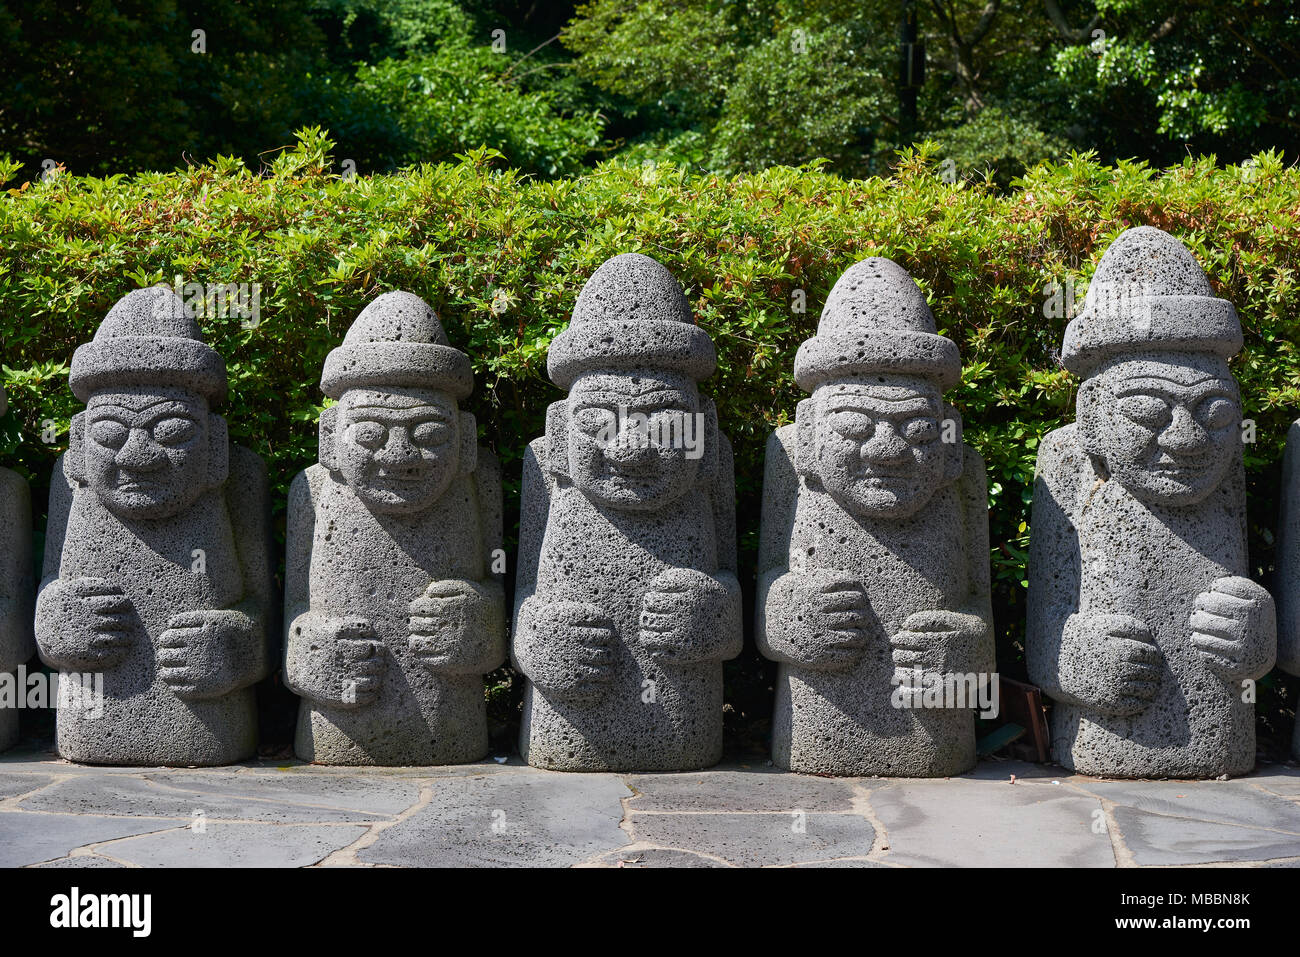 Jeju, Korea - May 25, 2017: Dol Hareubang, local traditional large rock statues. They are considered to be gods offering protection and fertility. Stock Photo